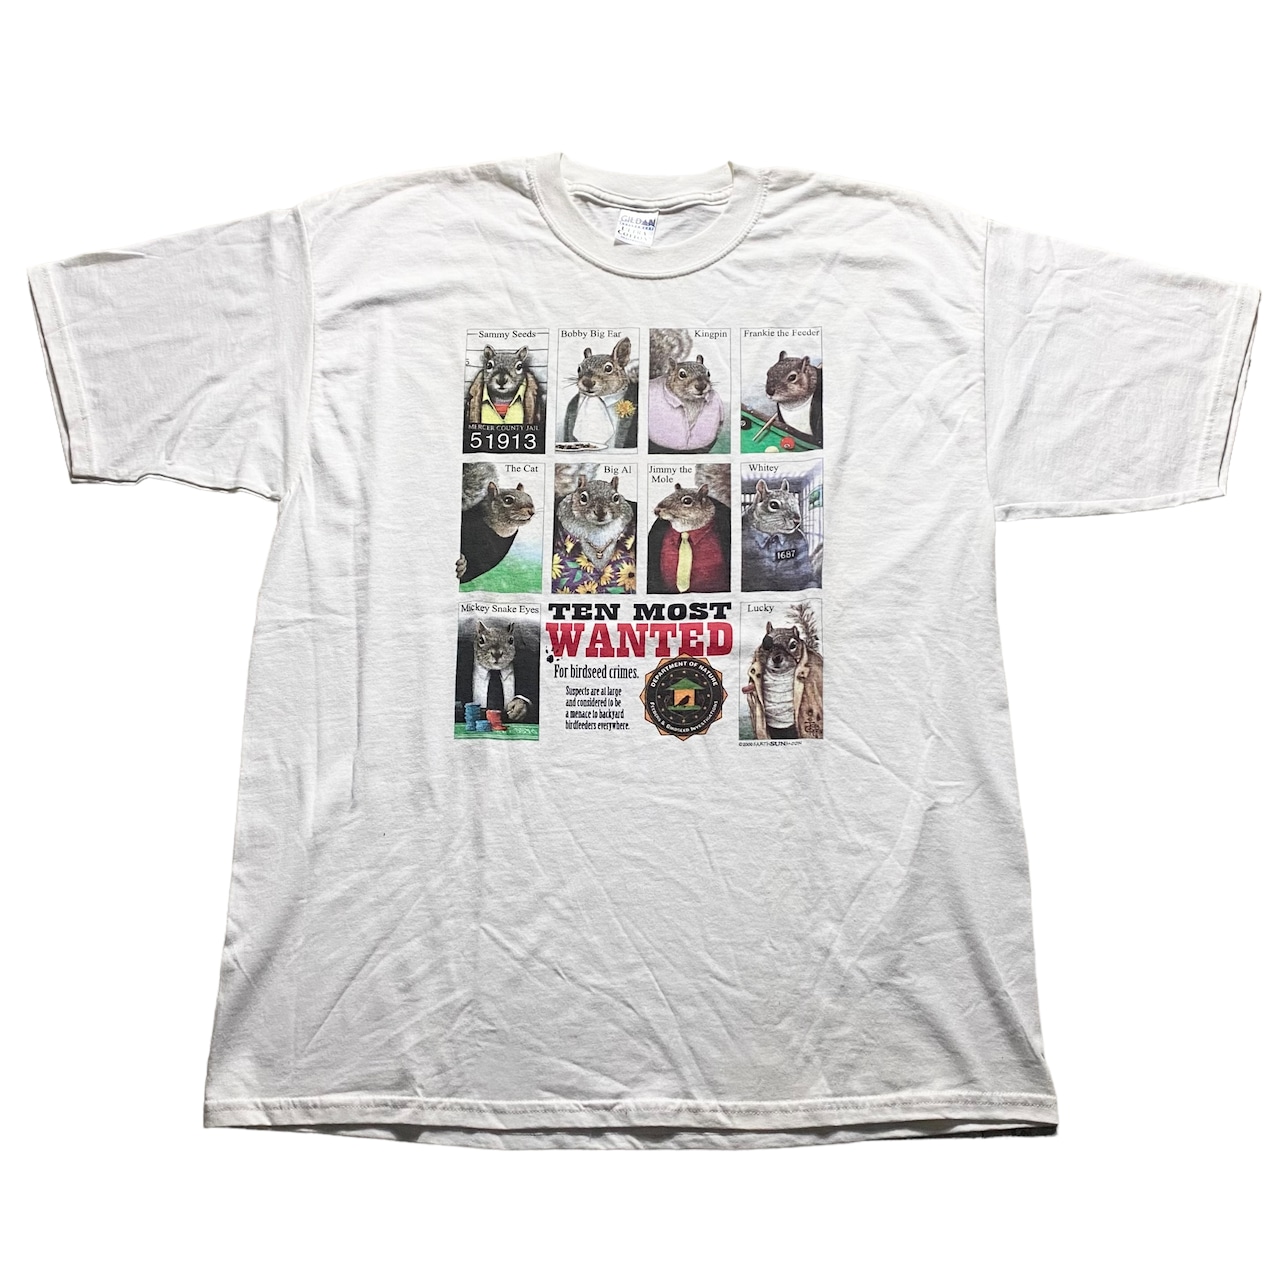 “TEN MOST WANTED” squirrel print tee